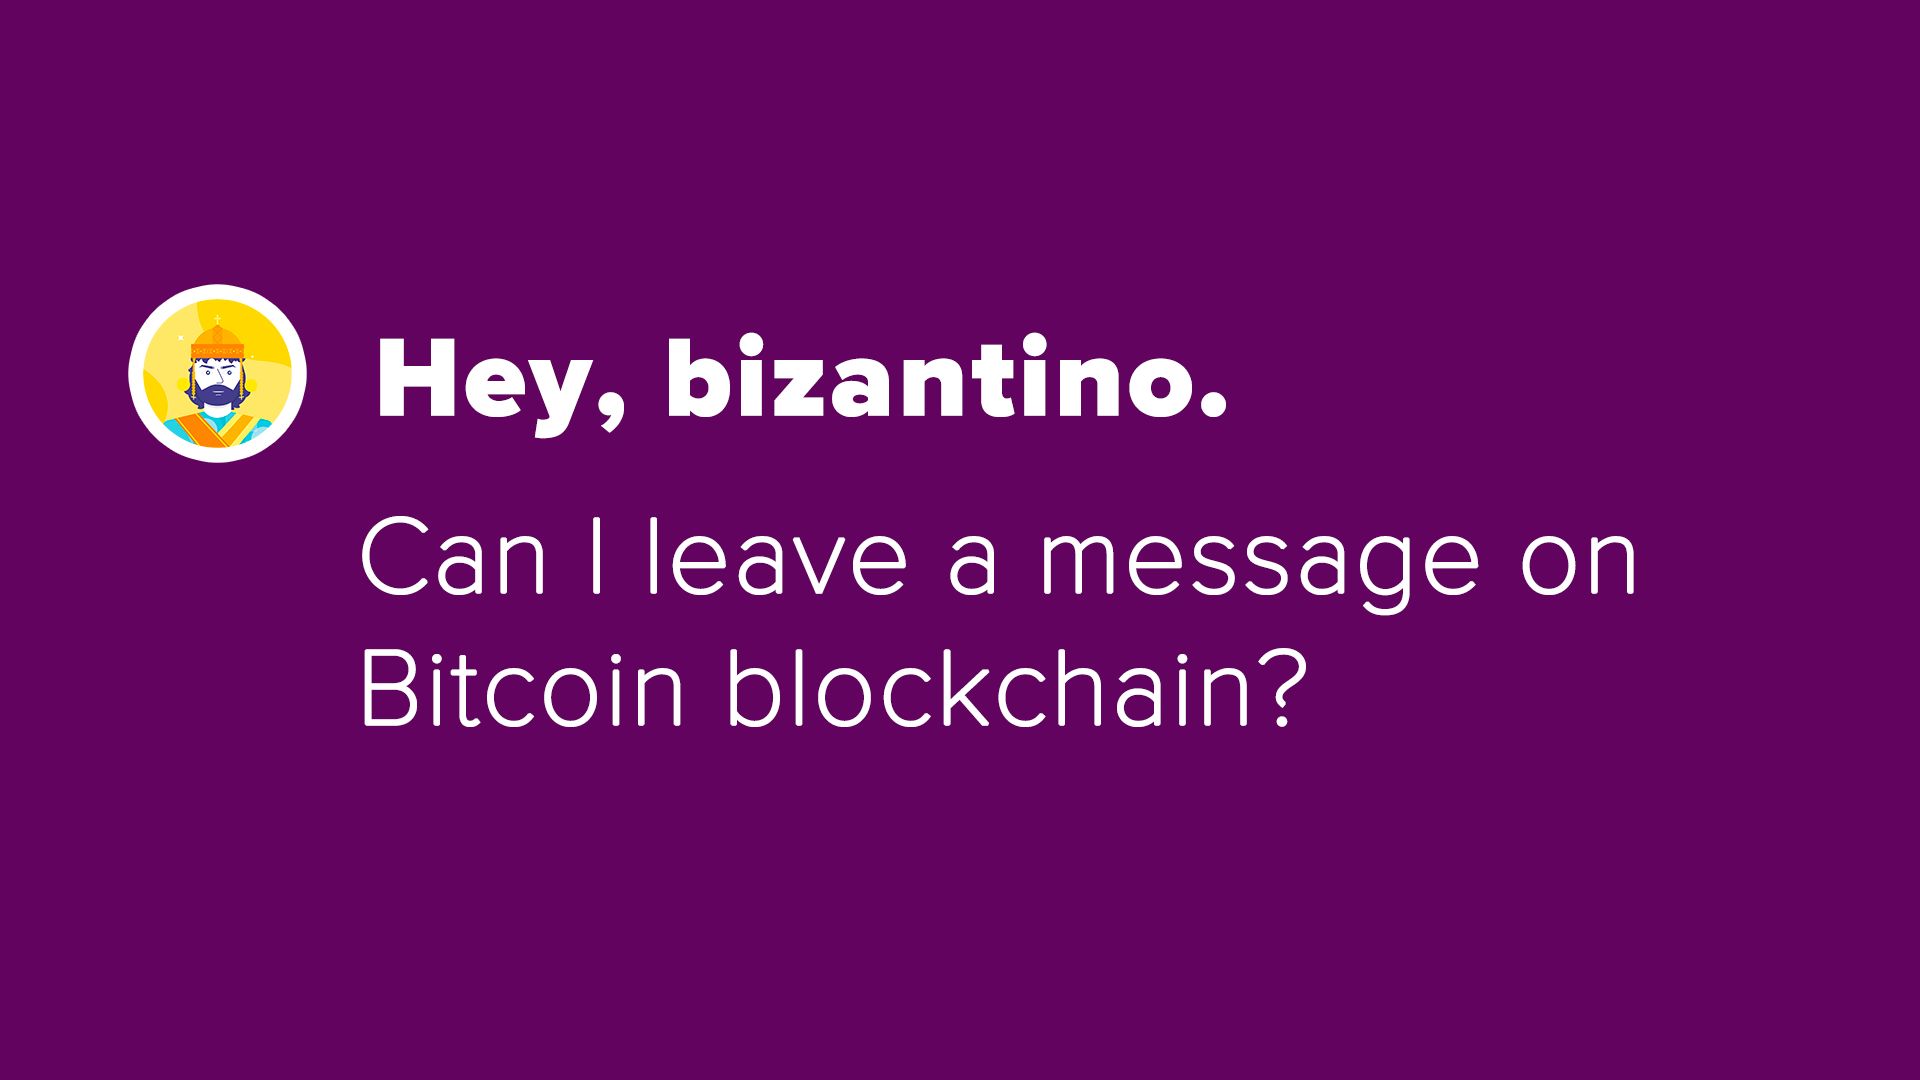 /adding-messages-on-the-bitcoin-blockchain-a-how-to-guide-h6593xkz feature image